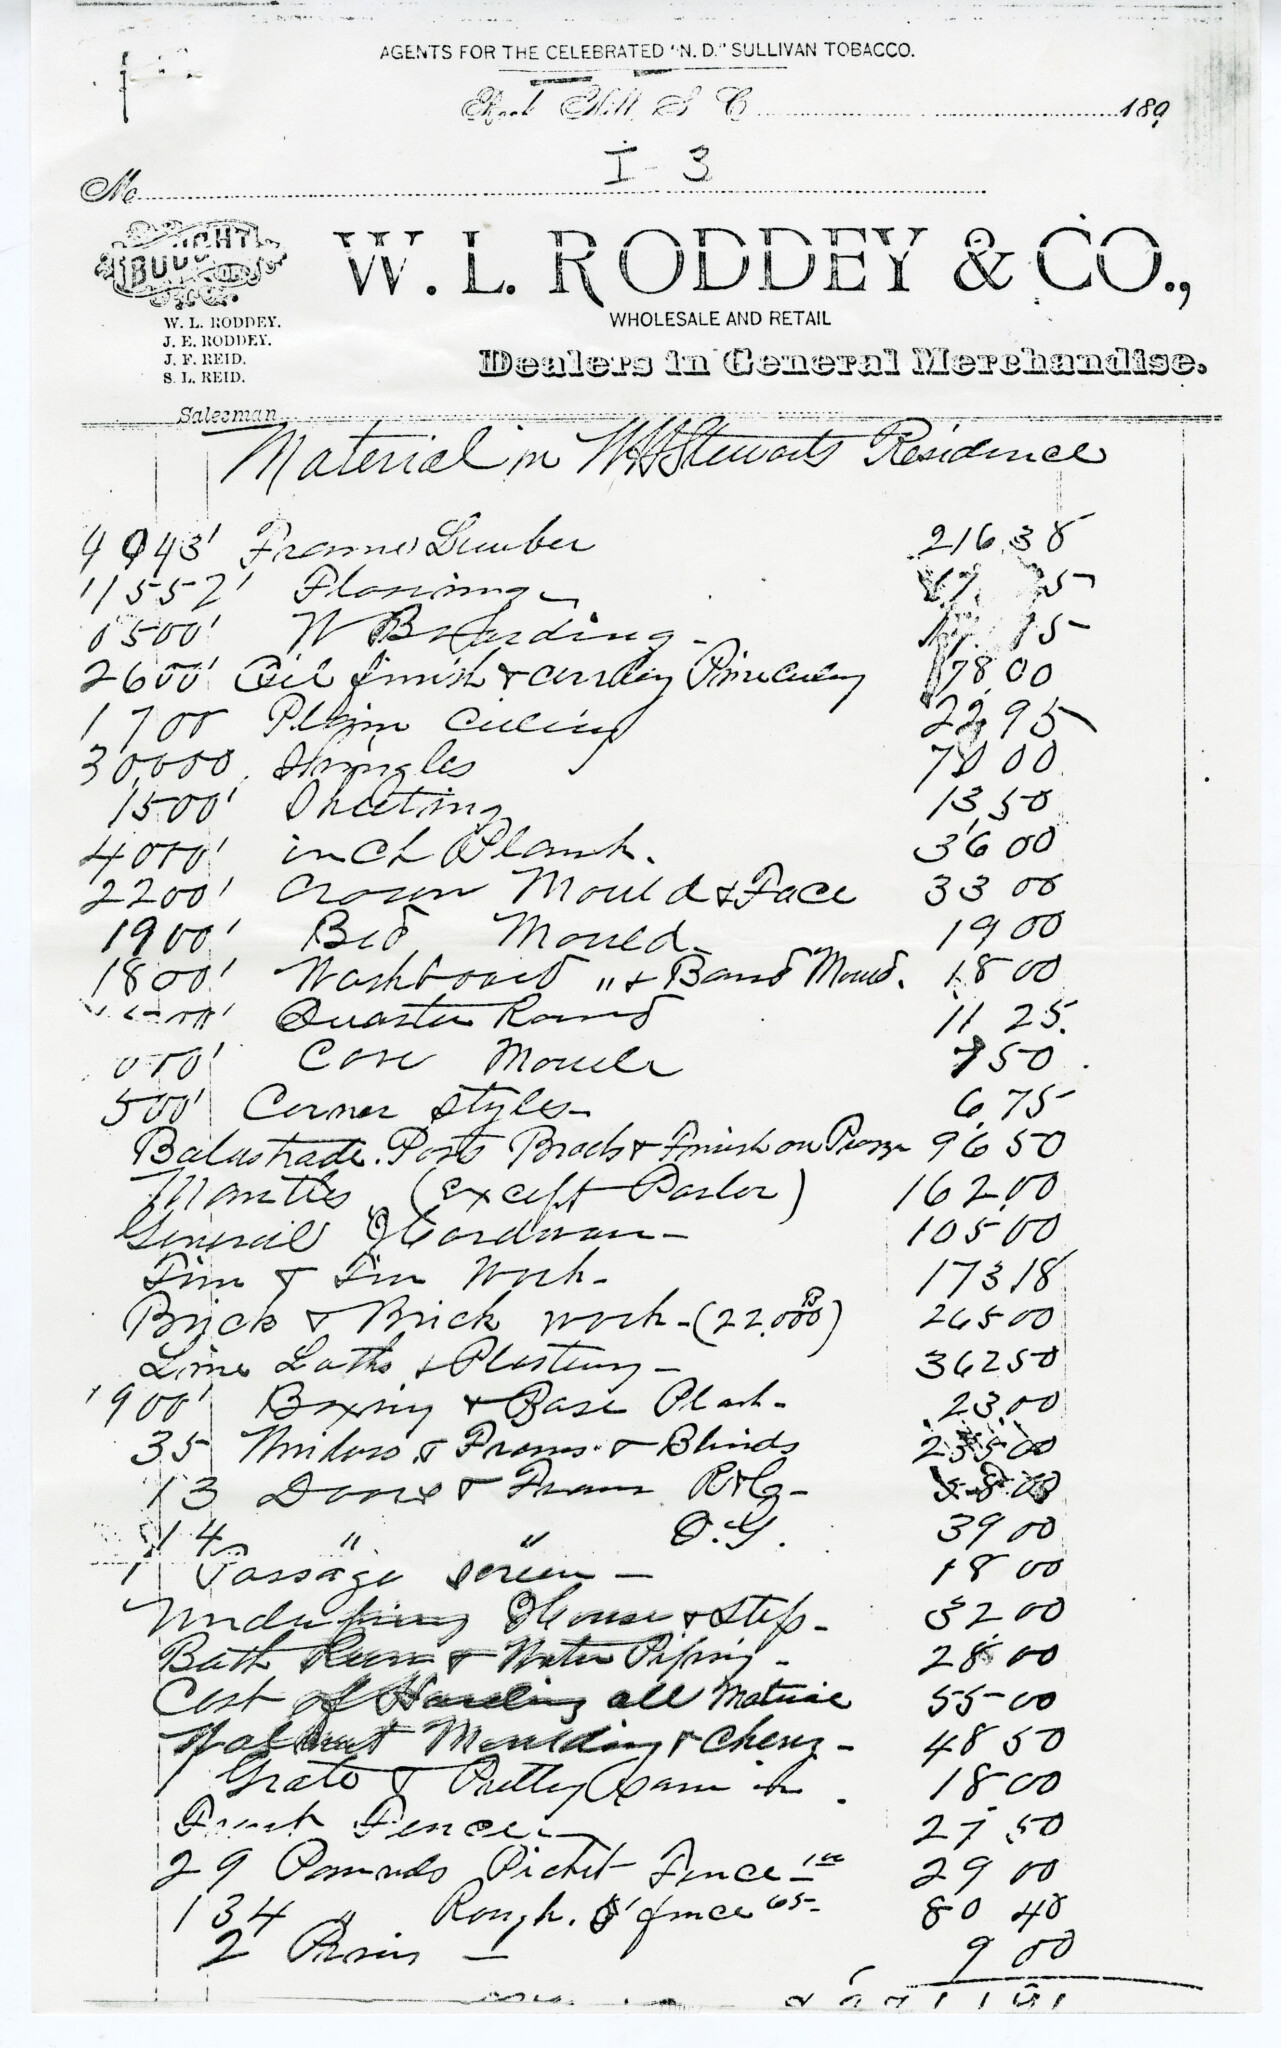 W.L. RODDEY'S MATERIAL LIST FOR THE STEWART HOME: WM. B. WHITE JR., COLLECTION WU PETTUS ARCHIVES